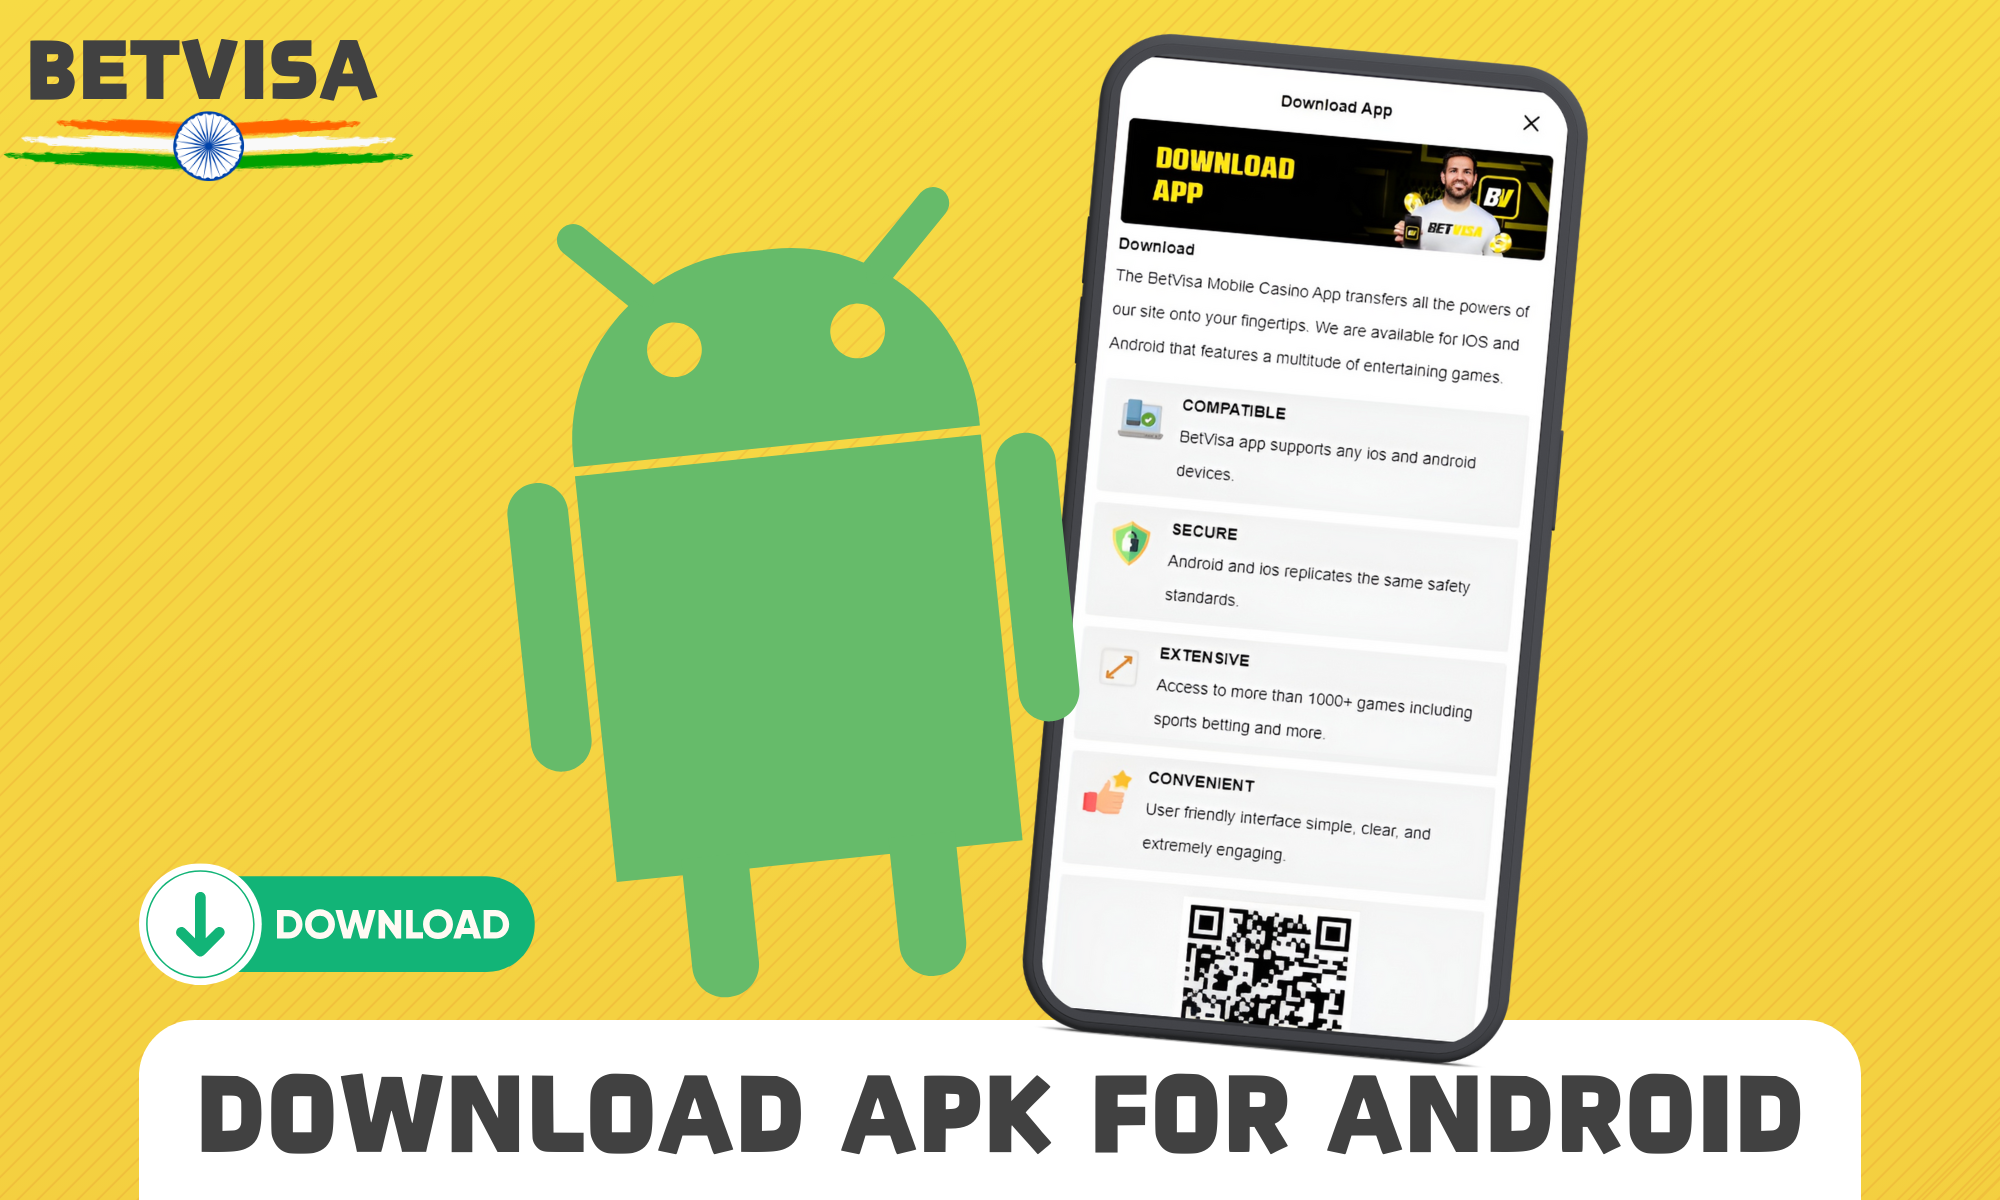 The Betvisa mobile app for Android